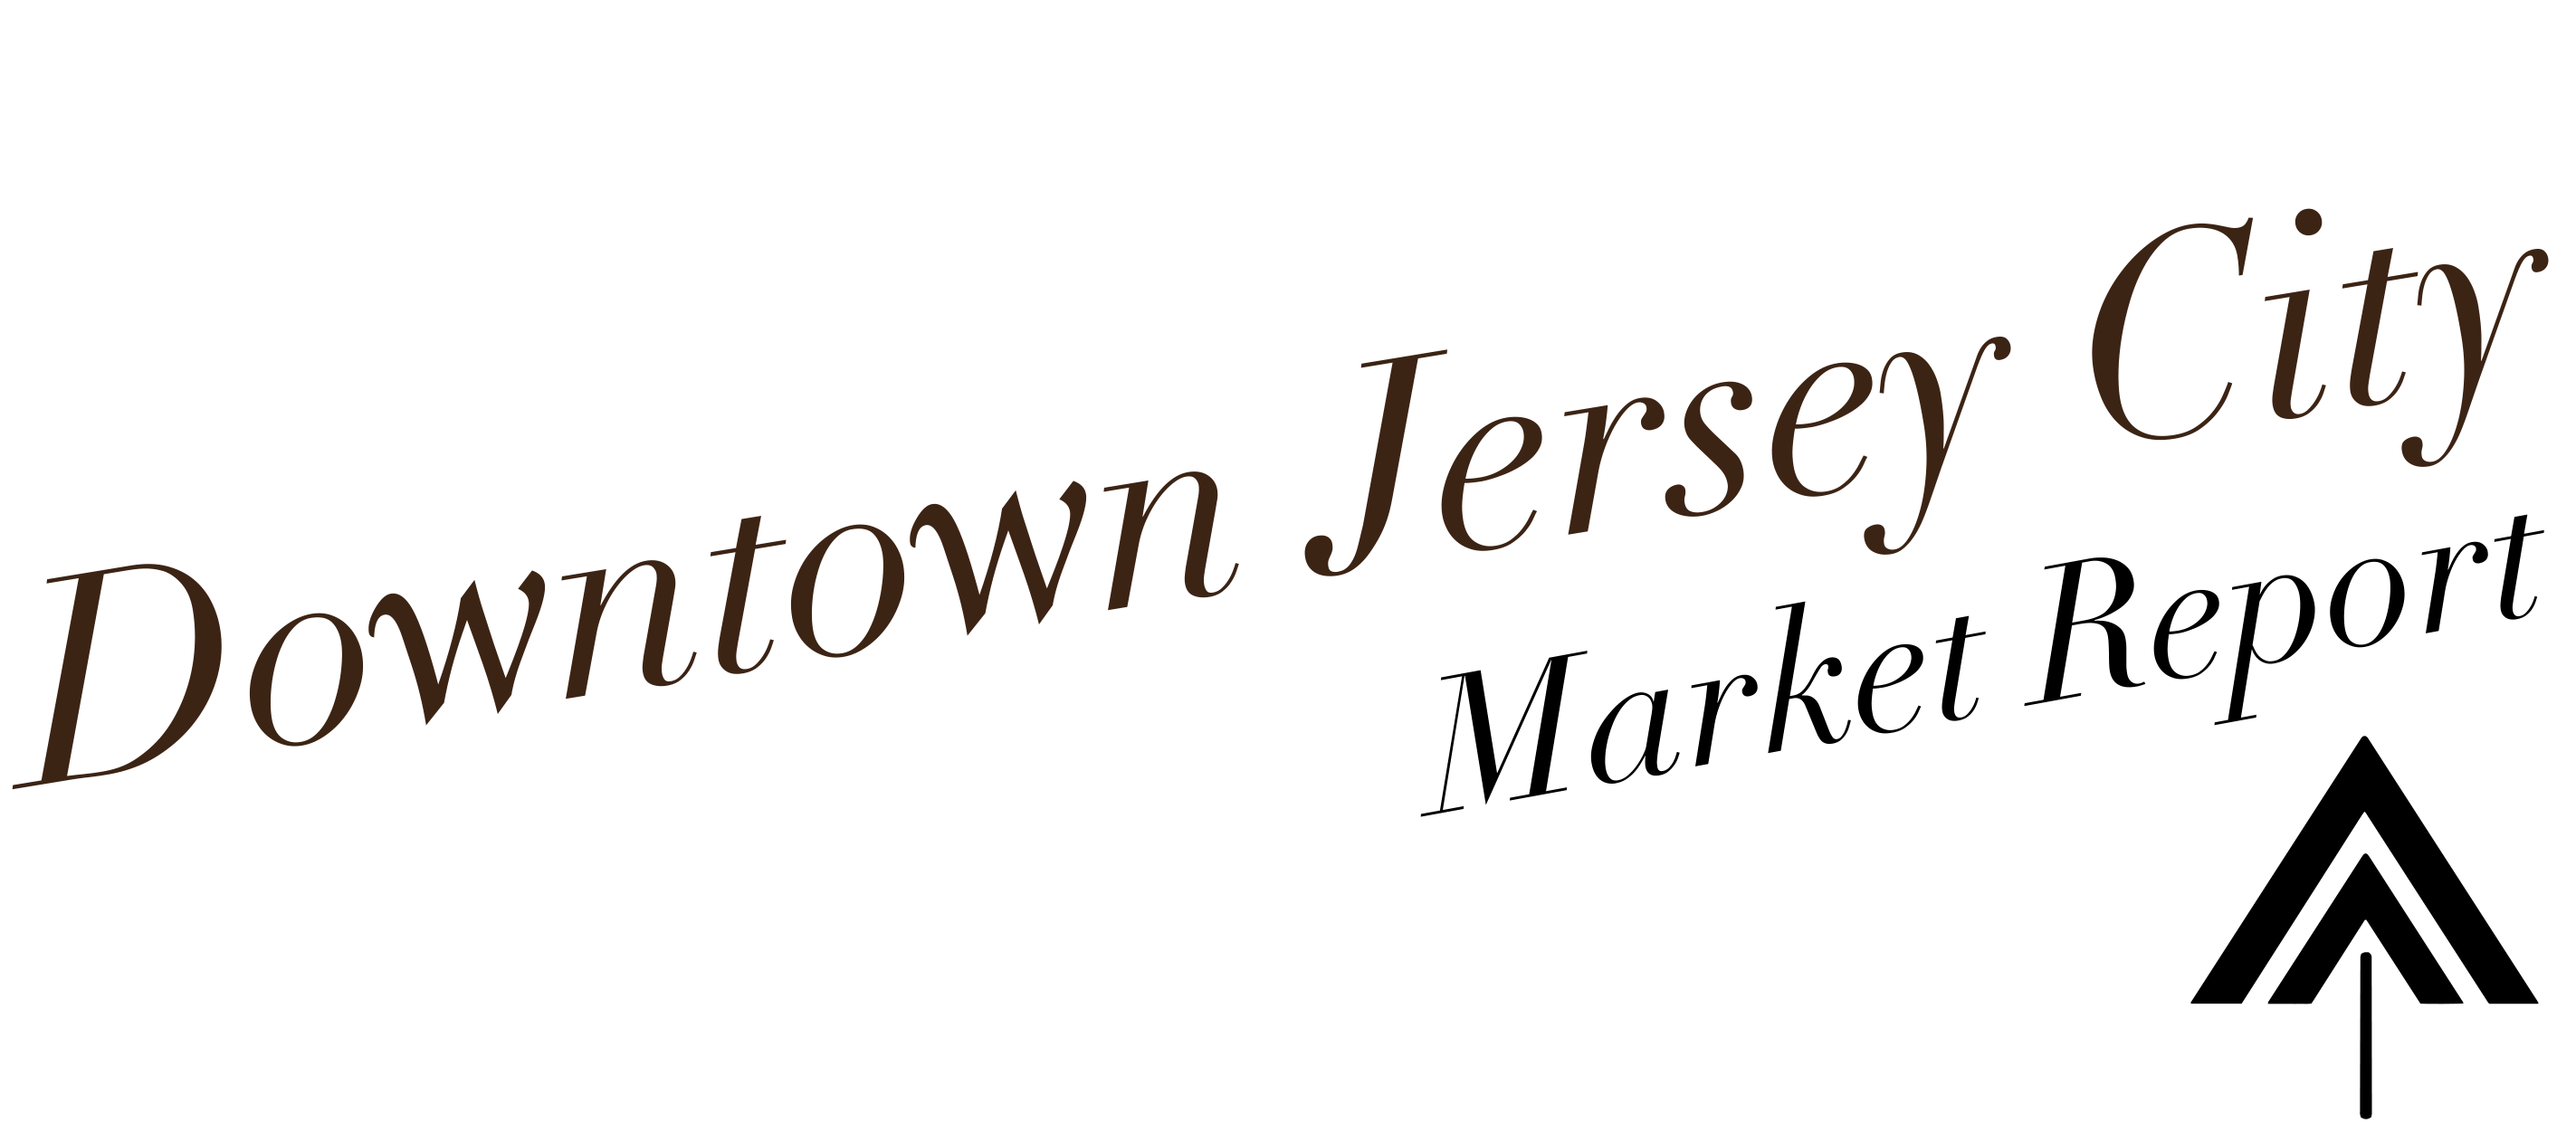 Downtown Jersey City Market Report